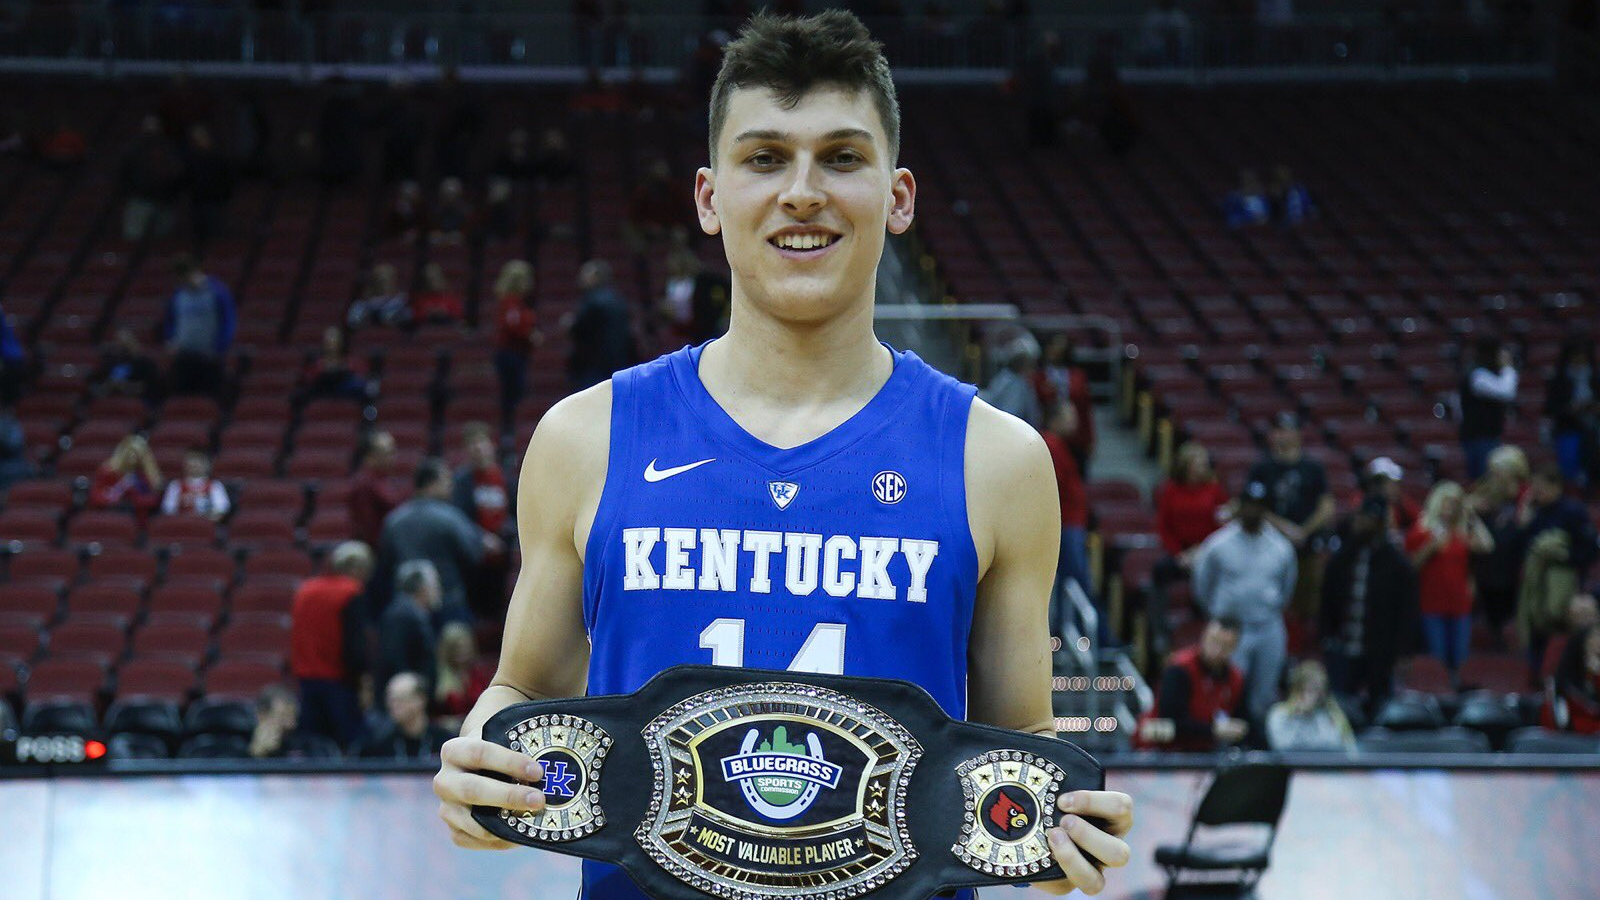 Herro Named MVP of UK/U of L Game by Bluegrass Sports Commission